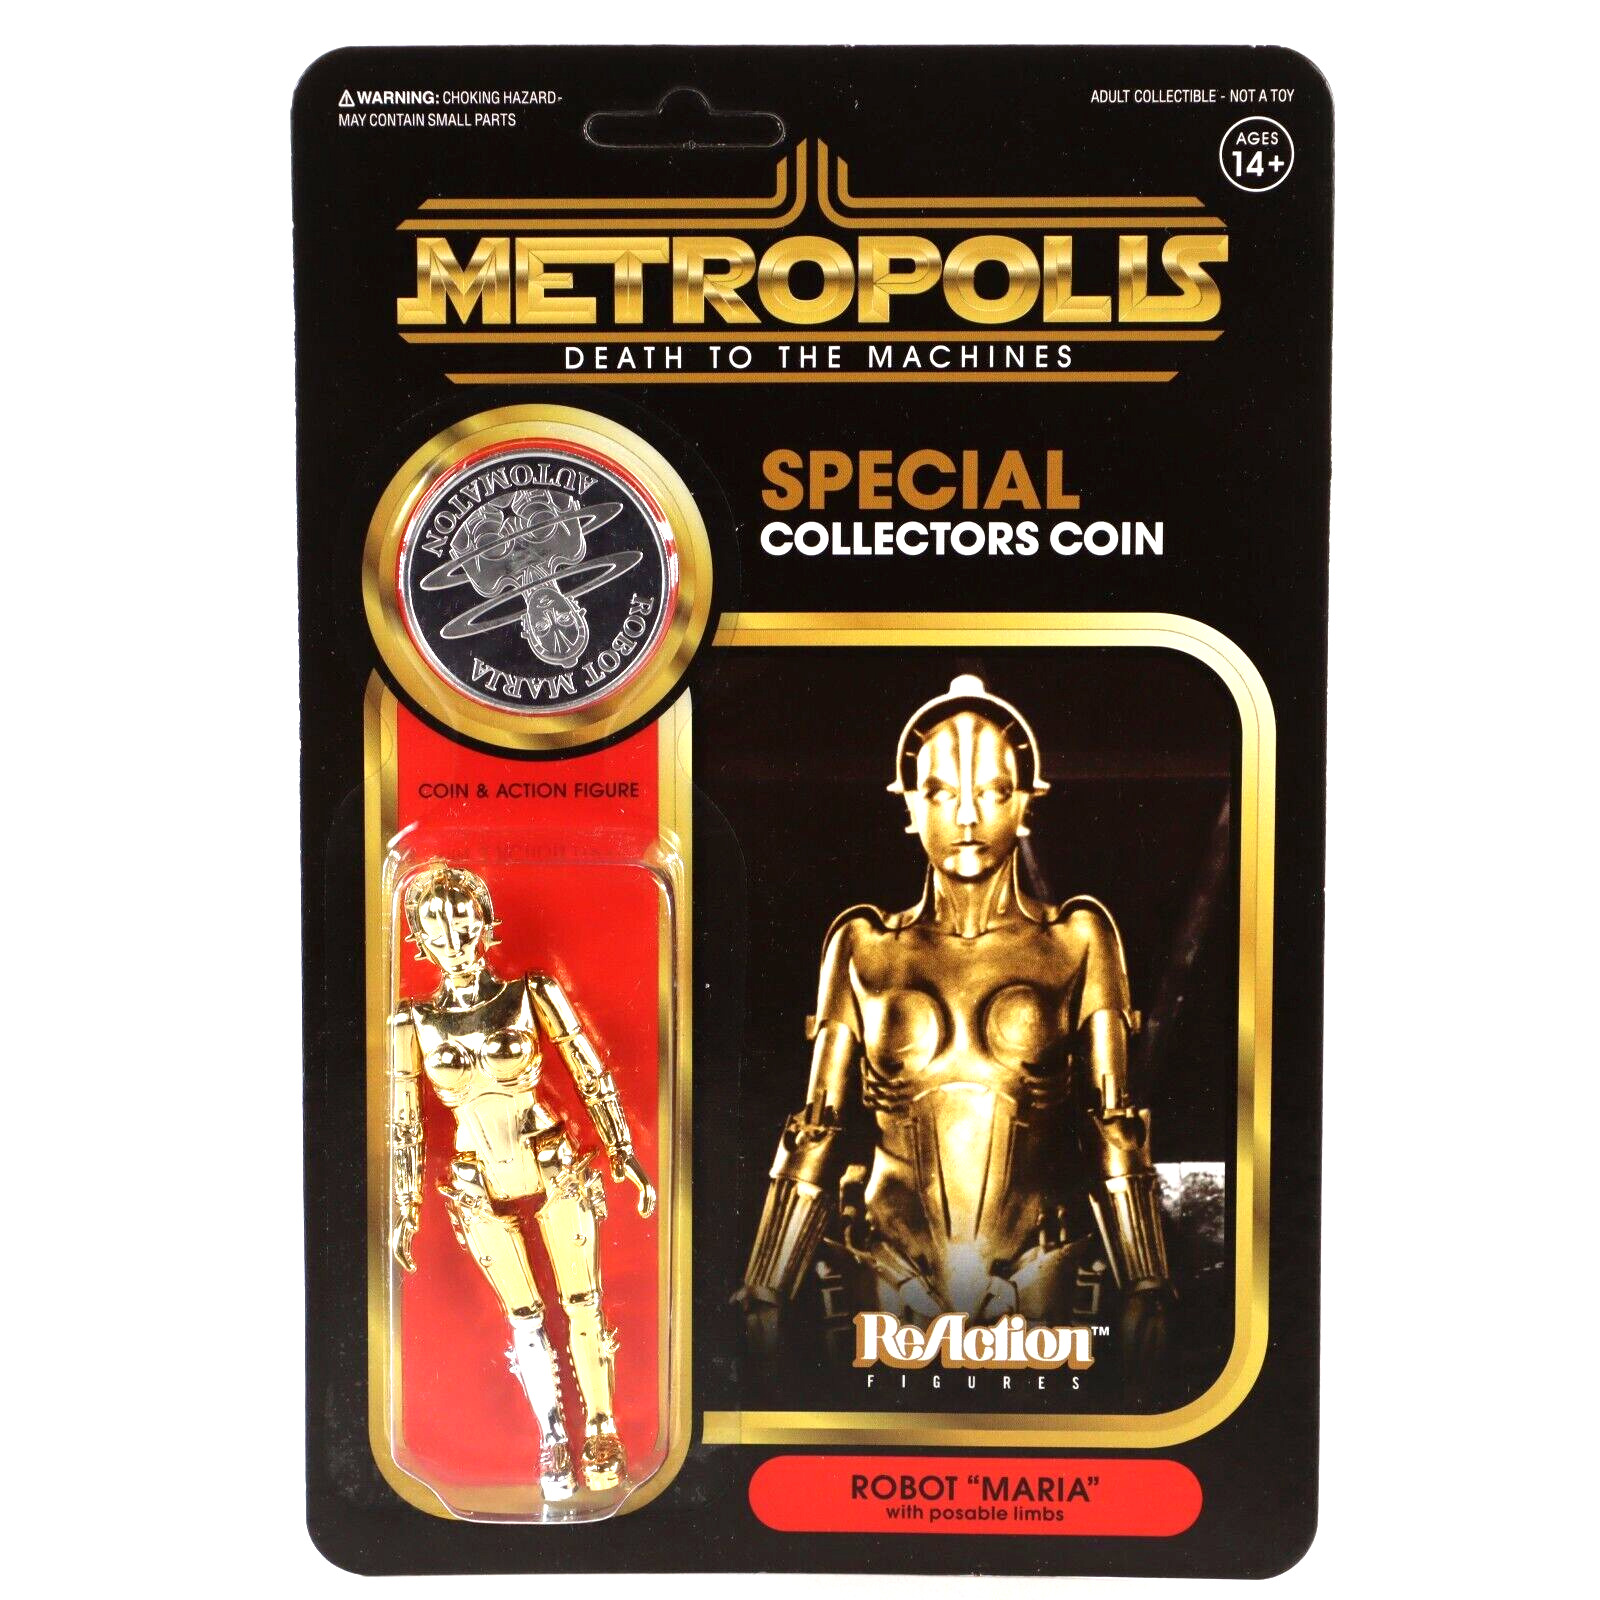 Super7 ReAction Metropolis Robot Maria Coin Figure SDCC 2018 Not Punched Sealed